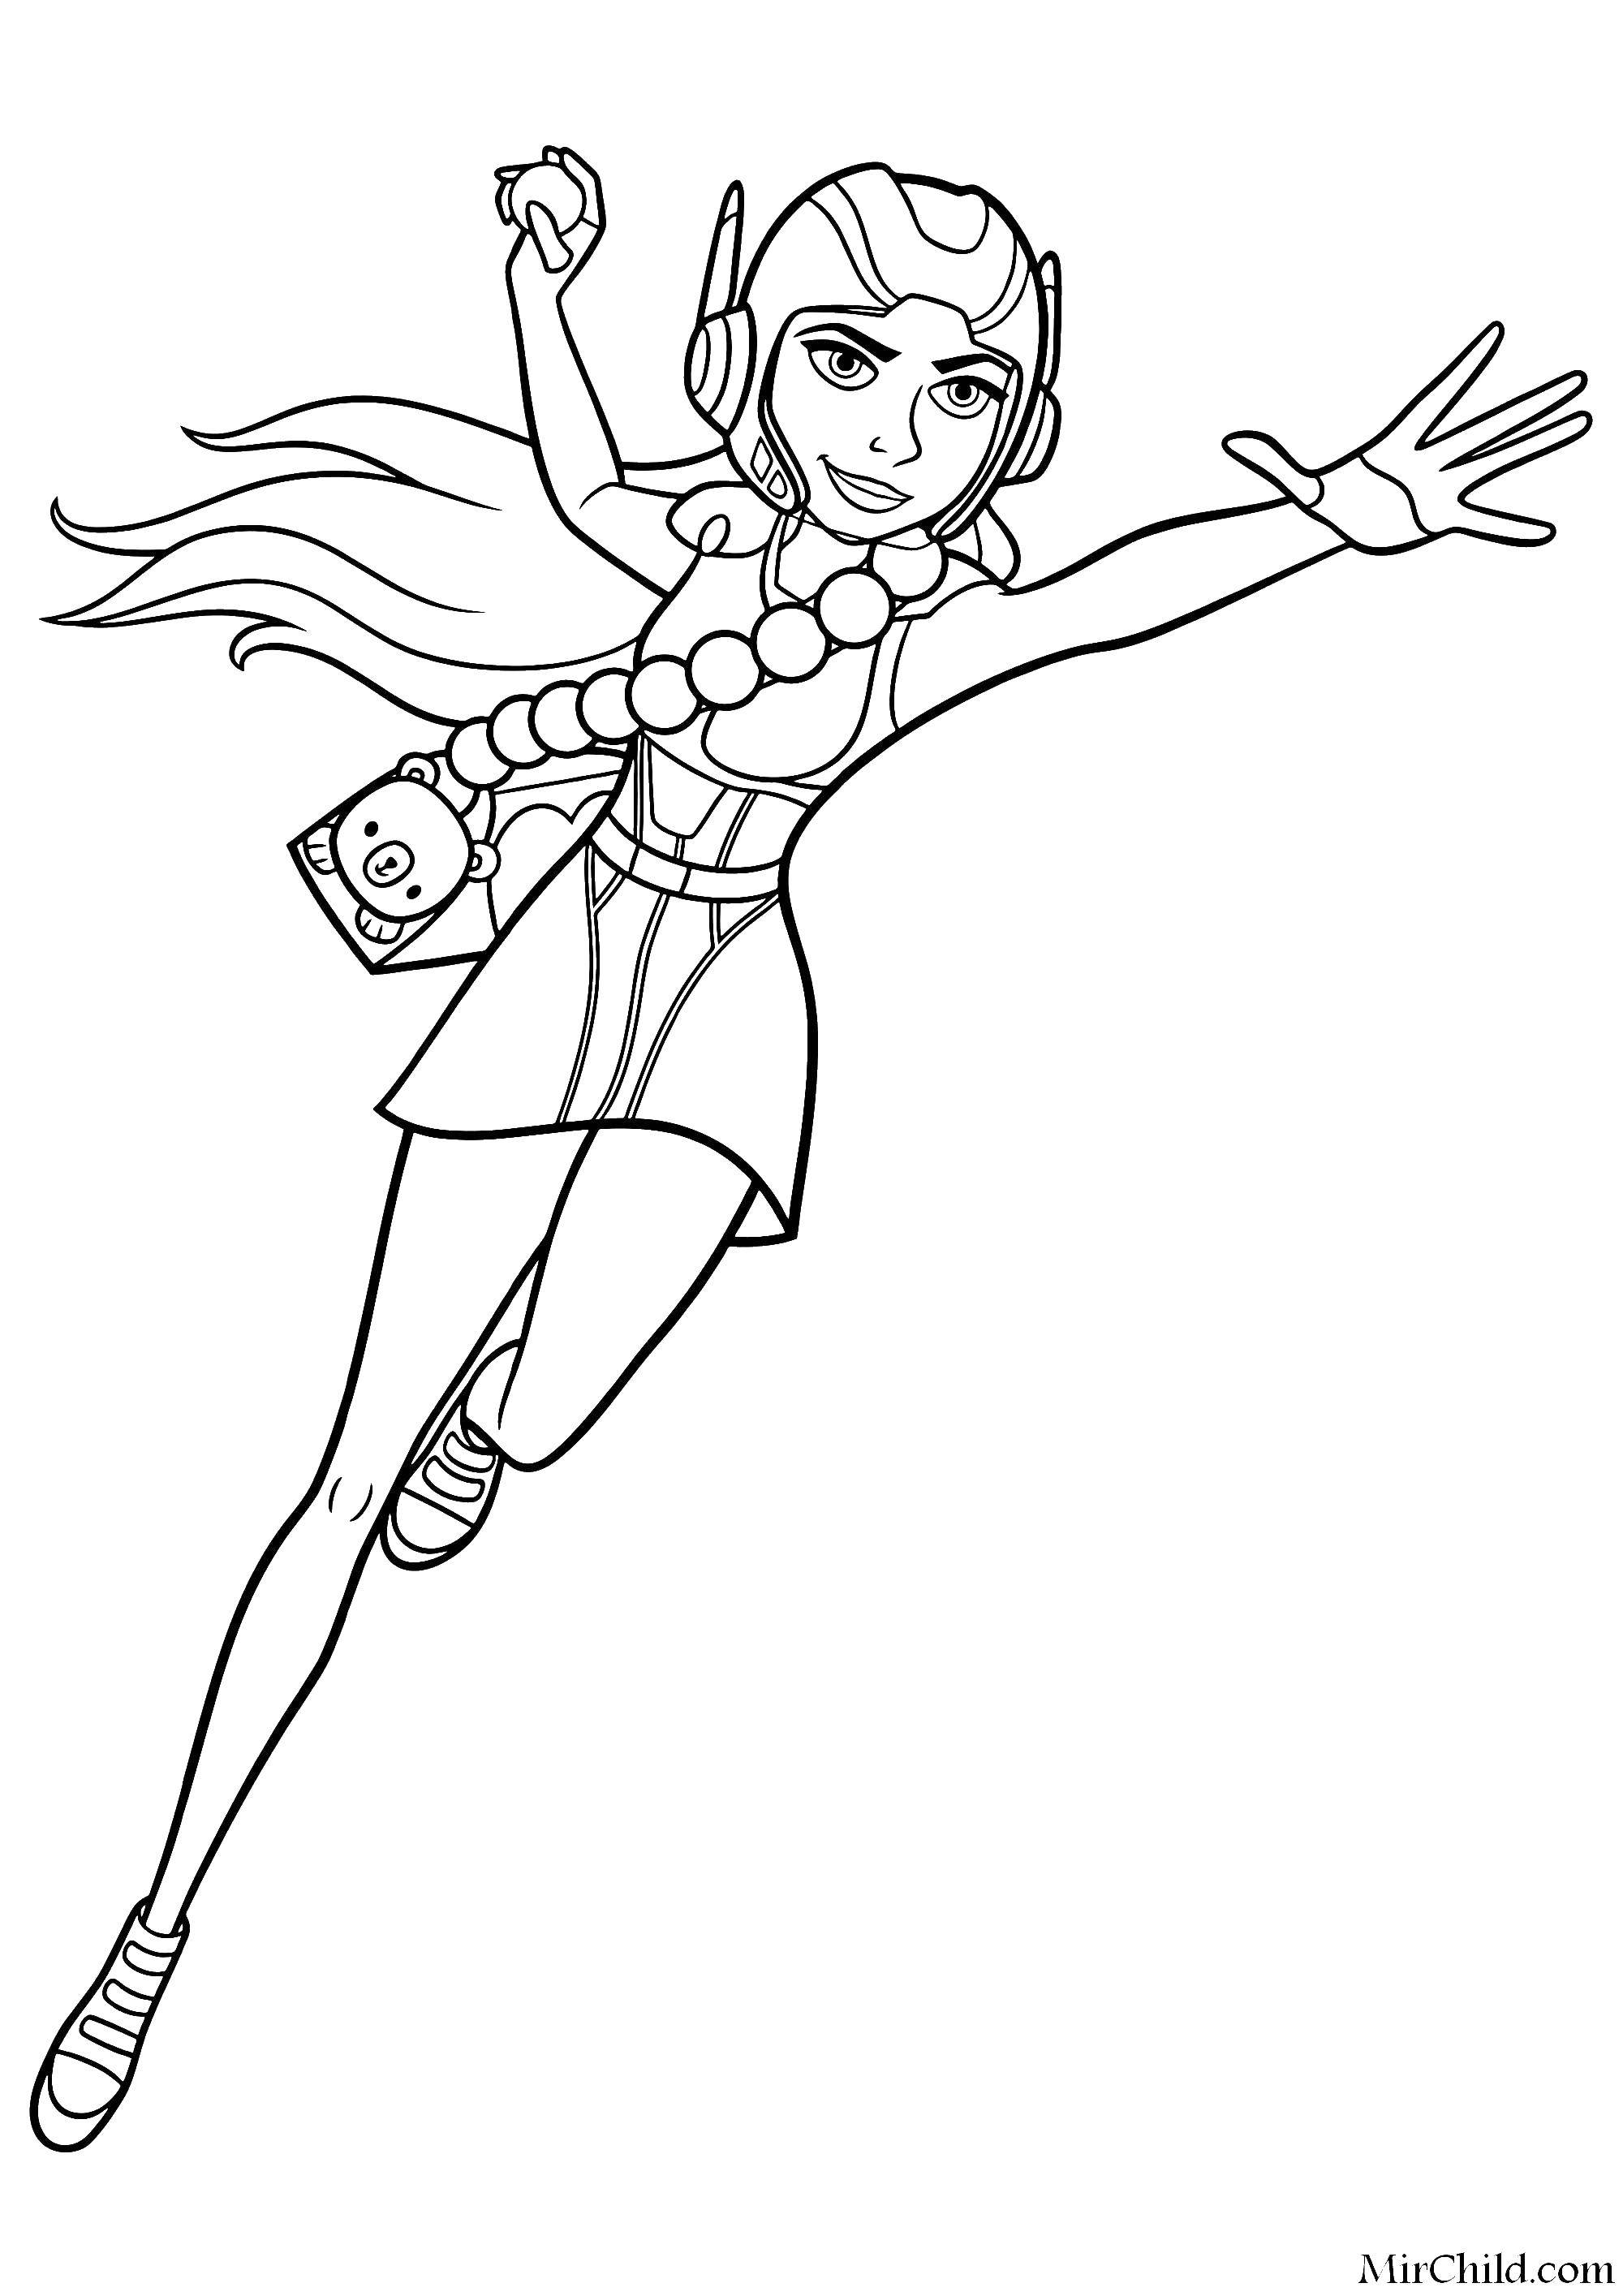 Coloring Girl from city of heroes. Category city of heroes. Tags:  cartoon , city of heroes, .